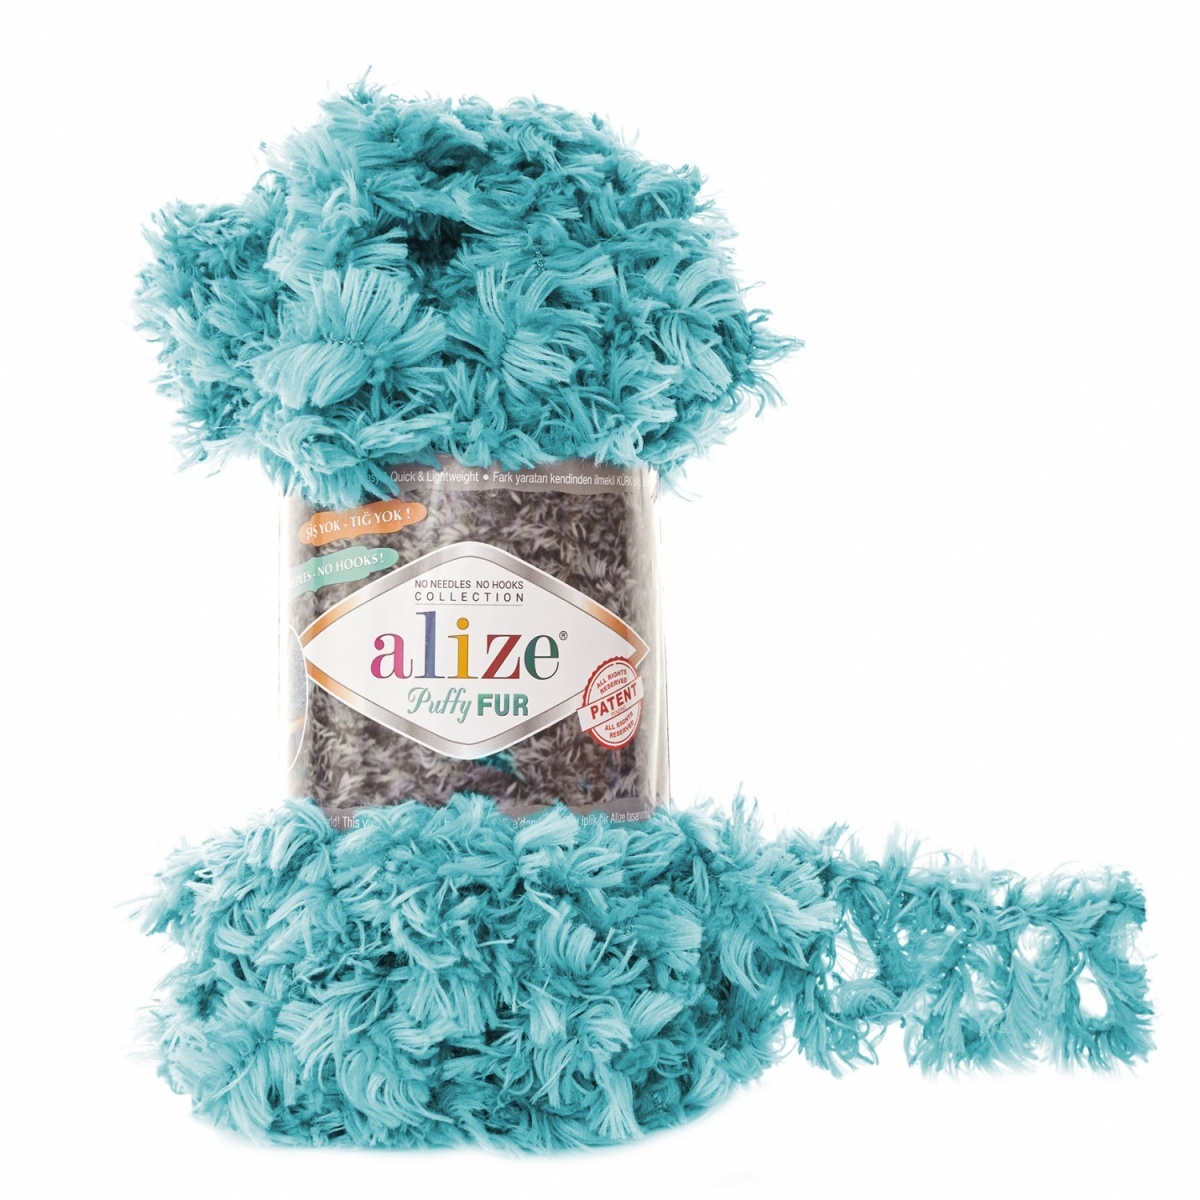 Alize Puffy Fur, 100% Polyester 5 Skein Value Pack, 500g фото 16